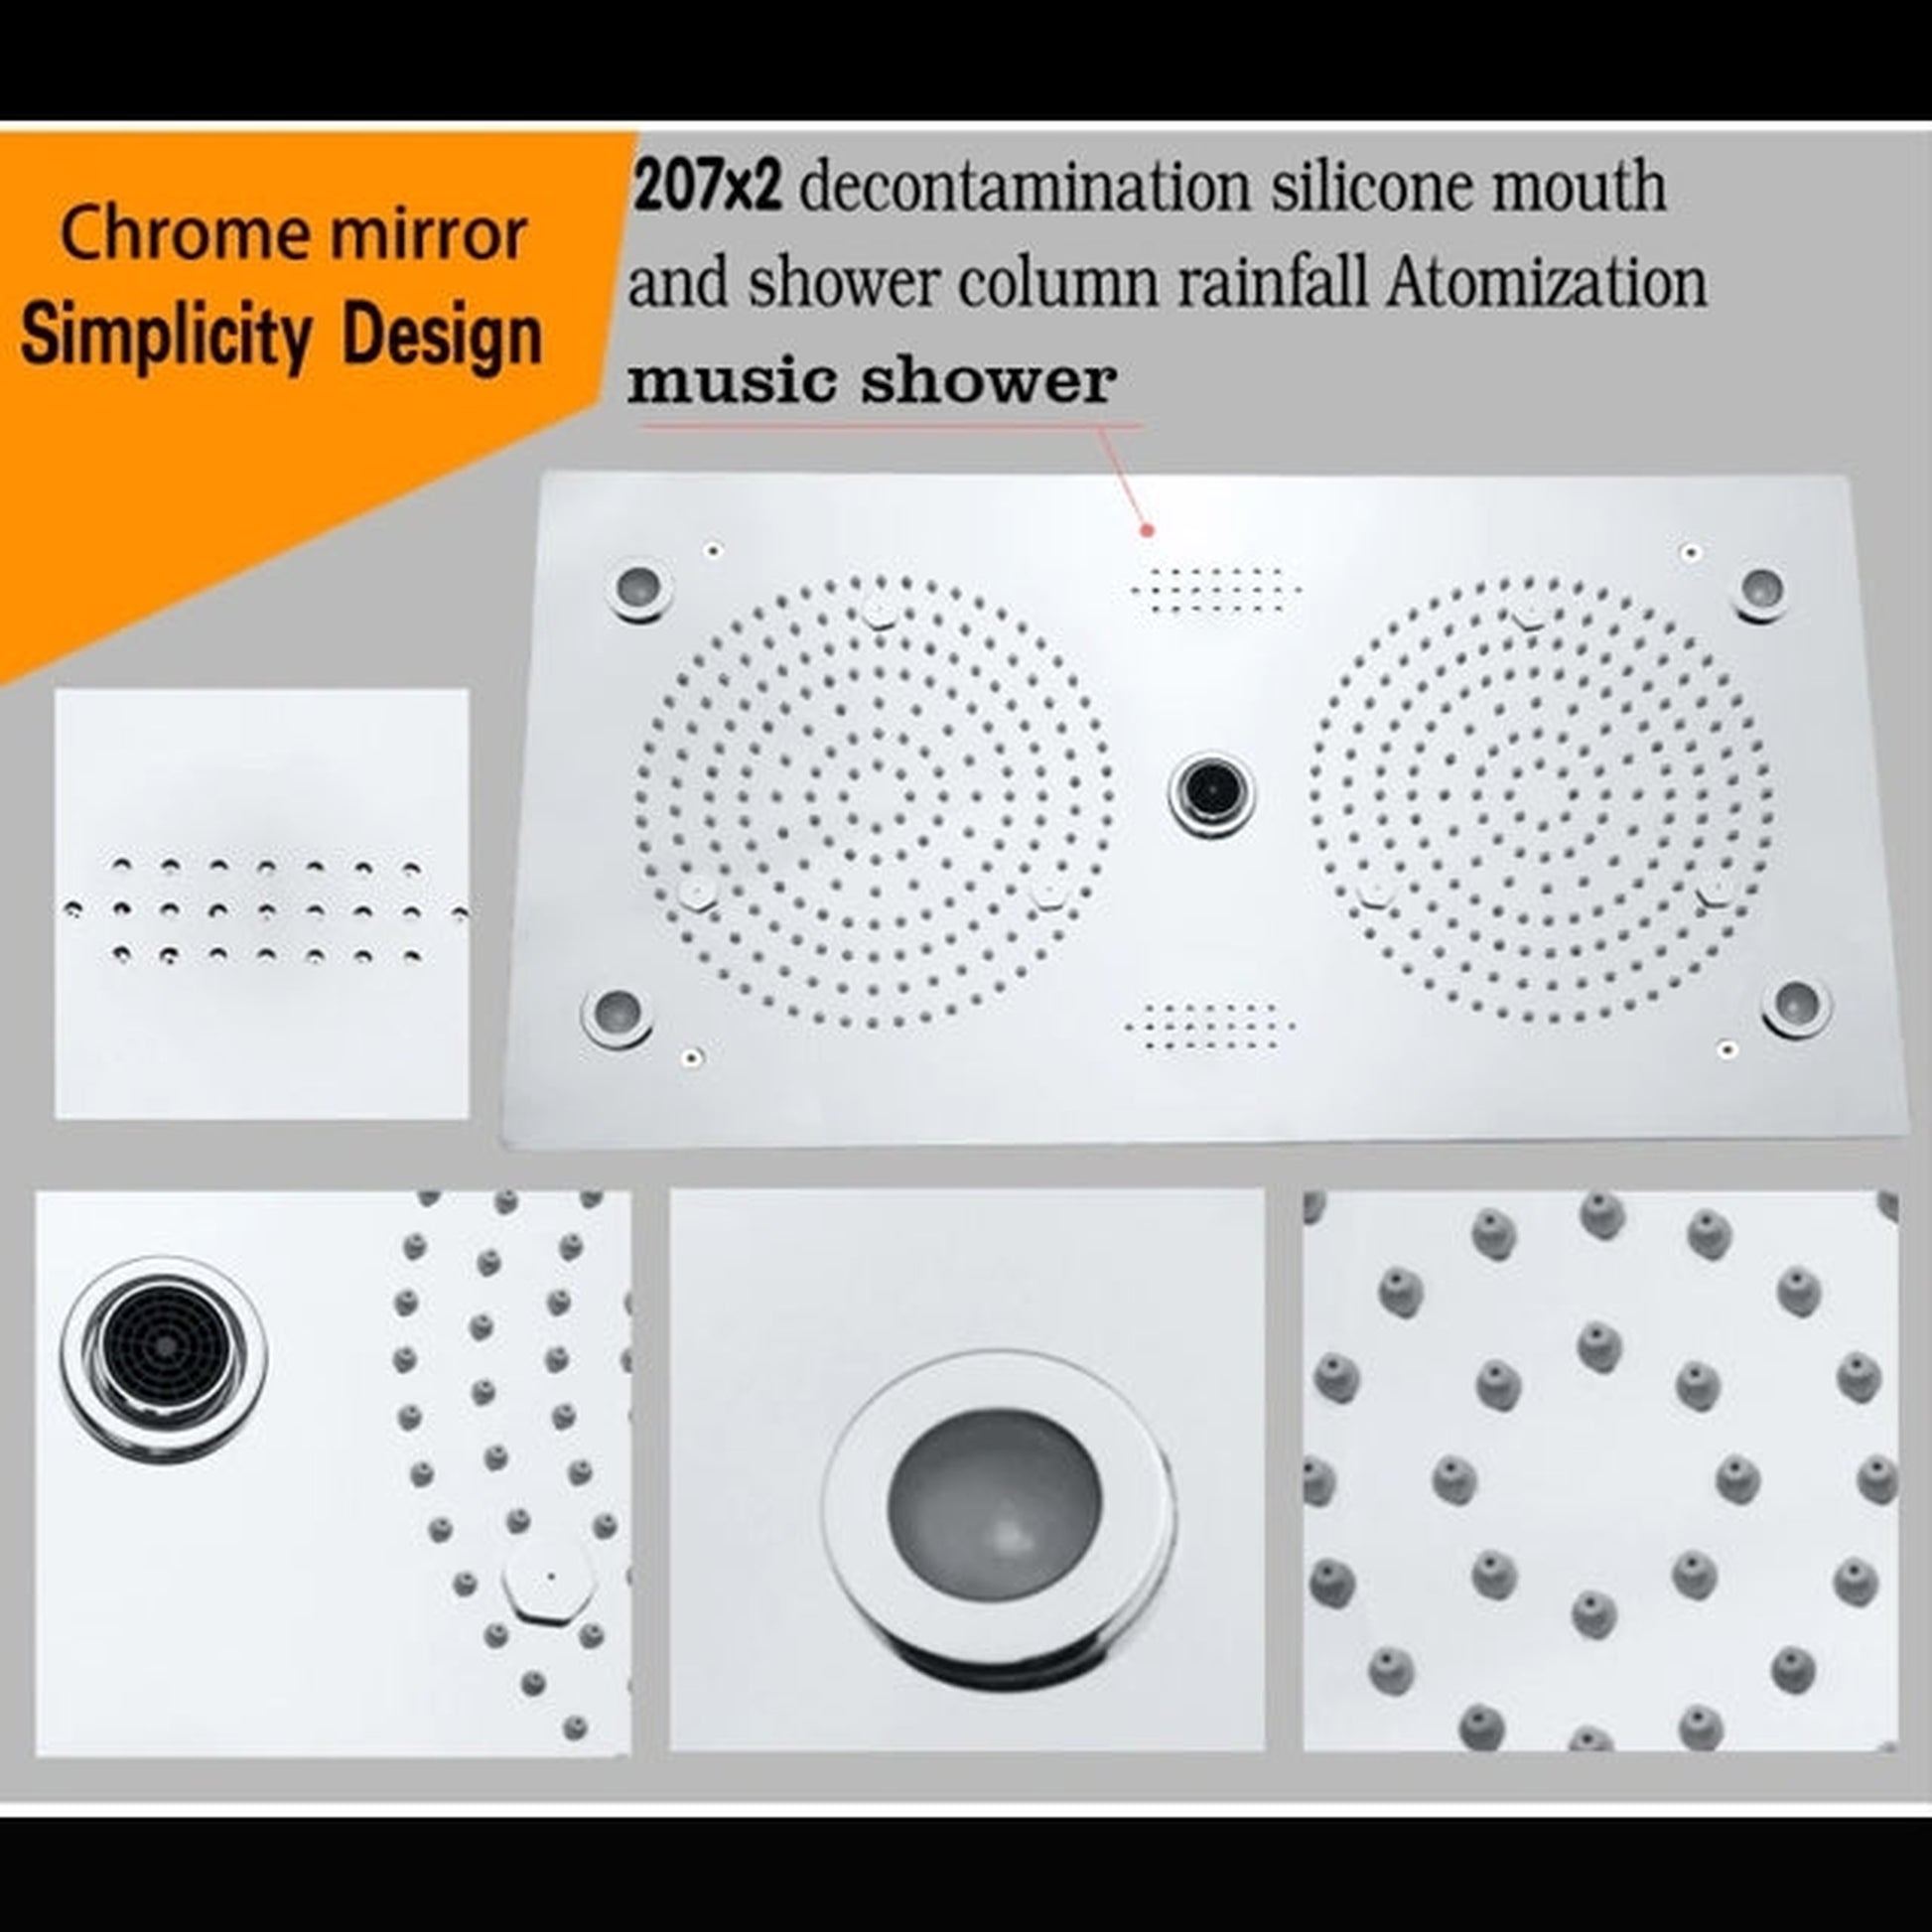 Fontana Vicenza Chrome Polished Recessed Ceiling Mounted LED Musical Thermostatic Rainfall Shower System With Hand Shower